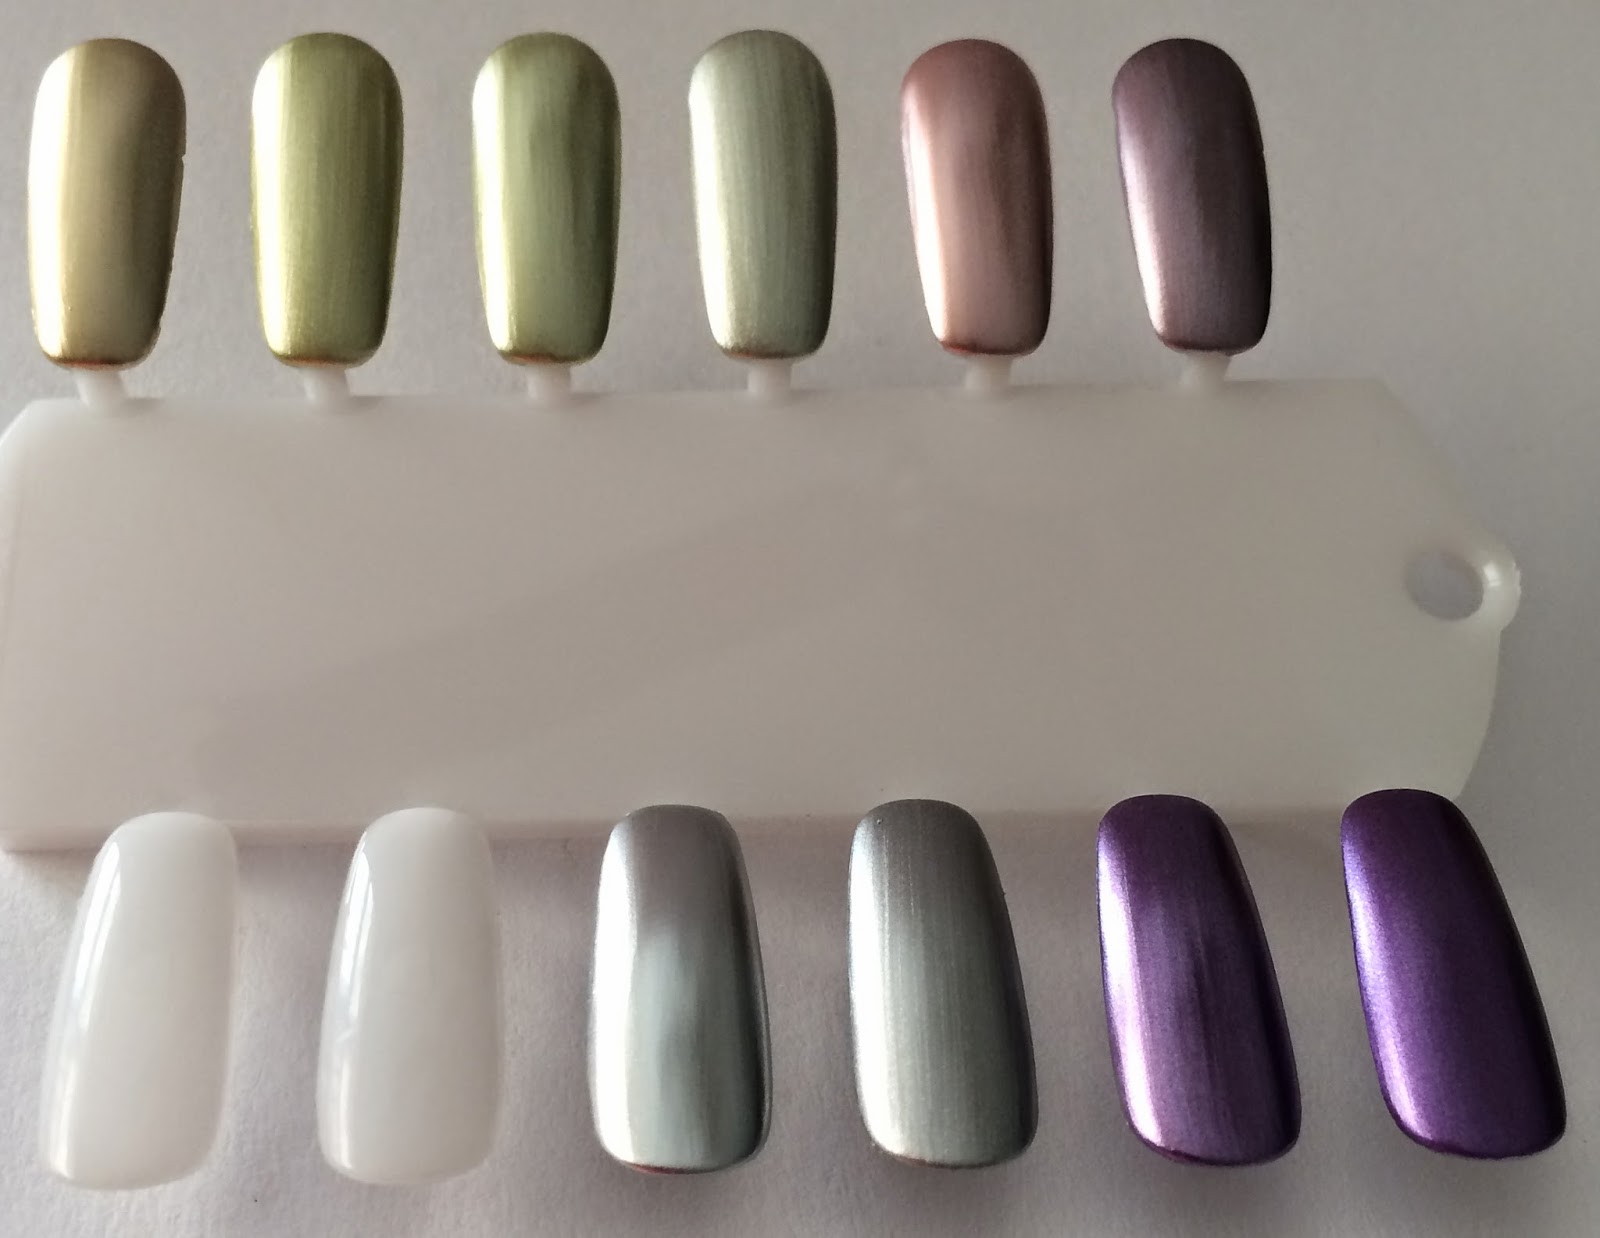 Confessions of a (Drugstore) Stalker: Swatches of Sally Hansen Color ...